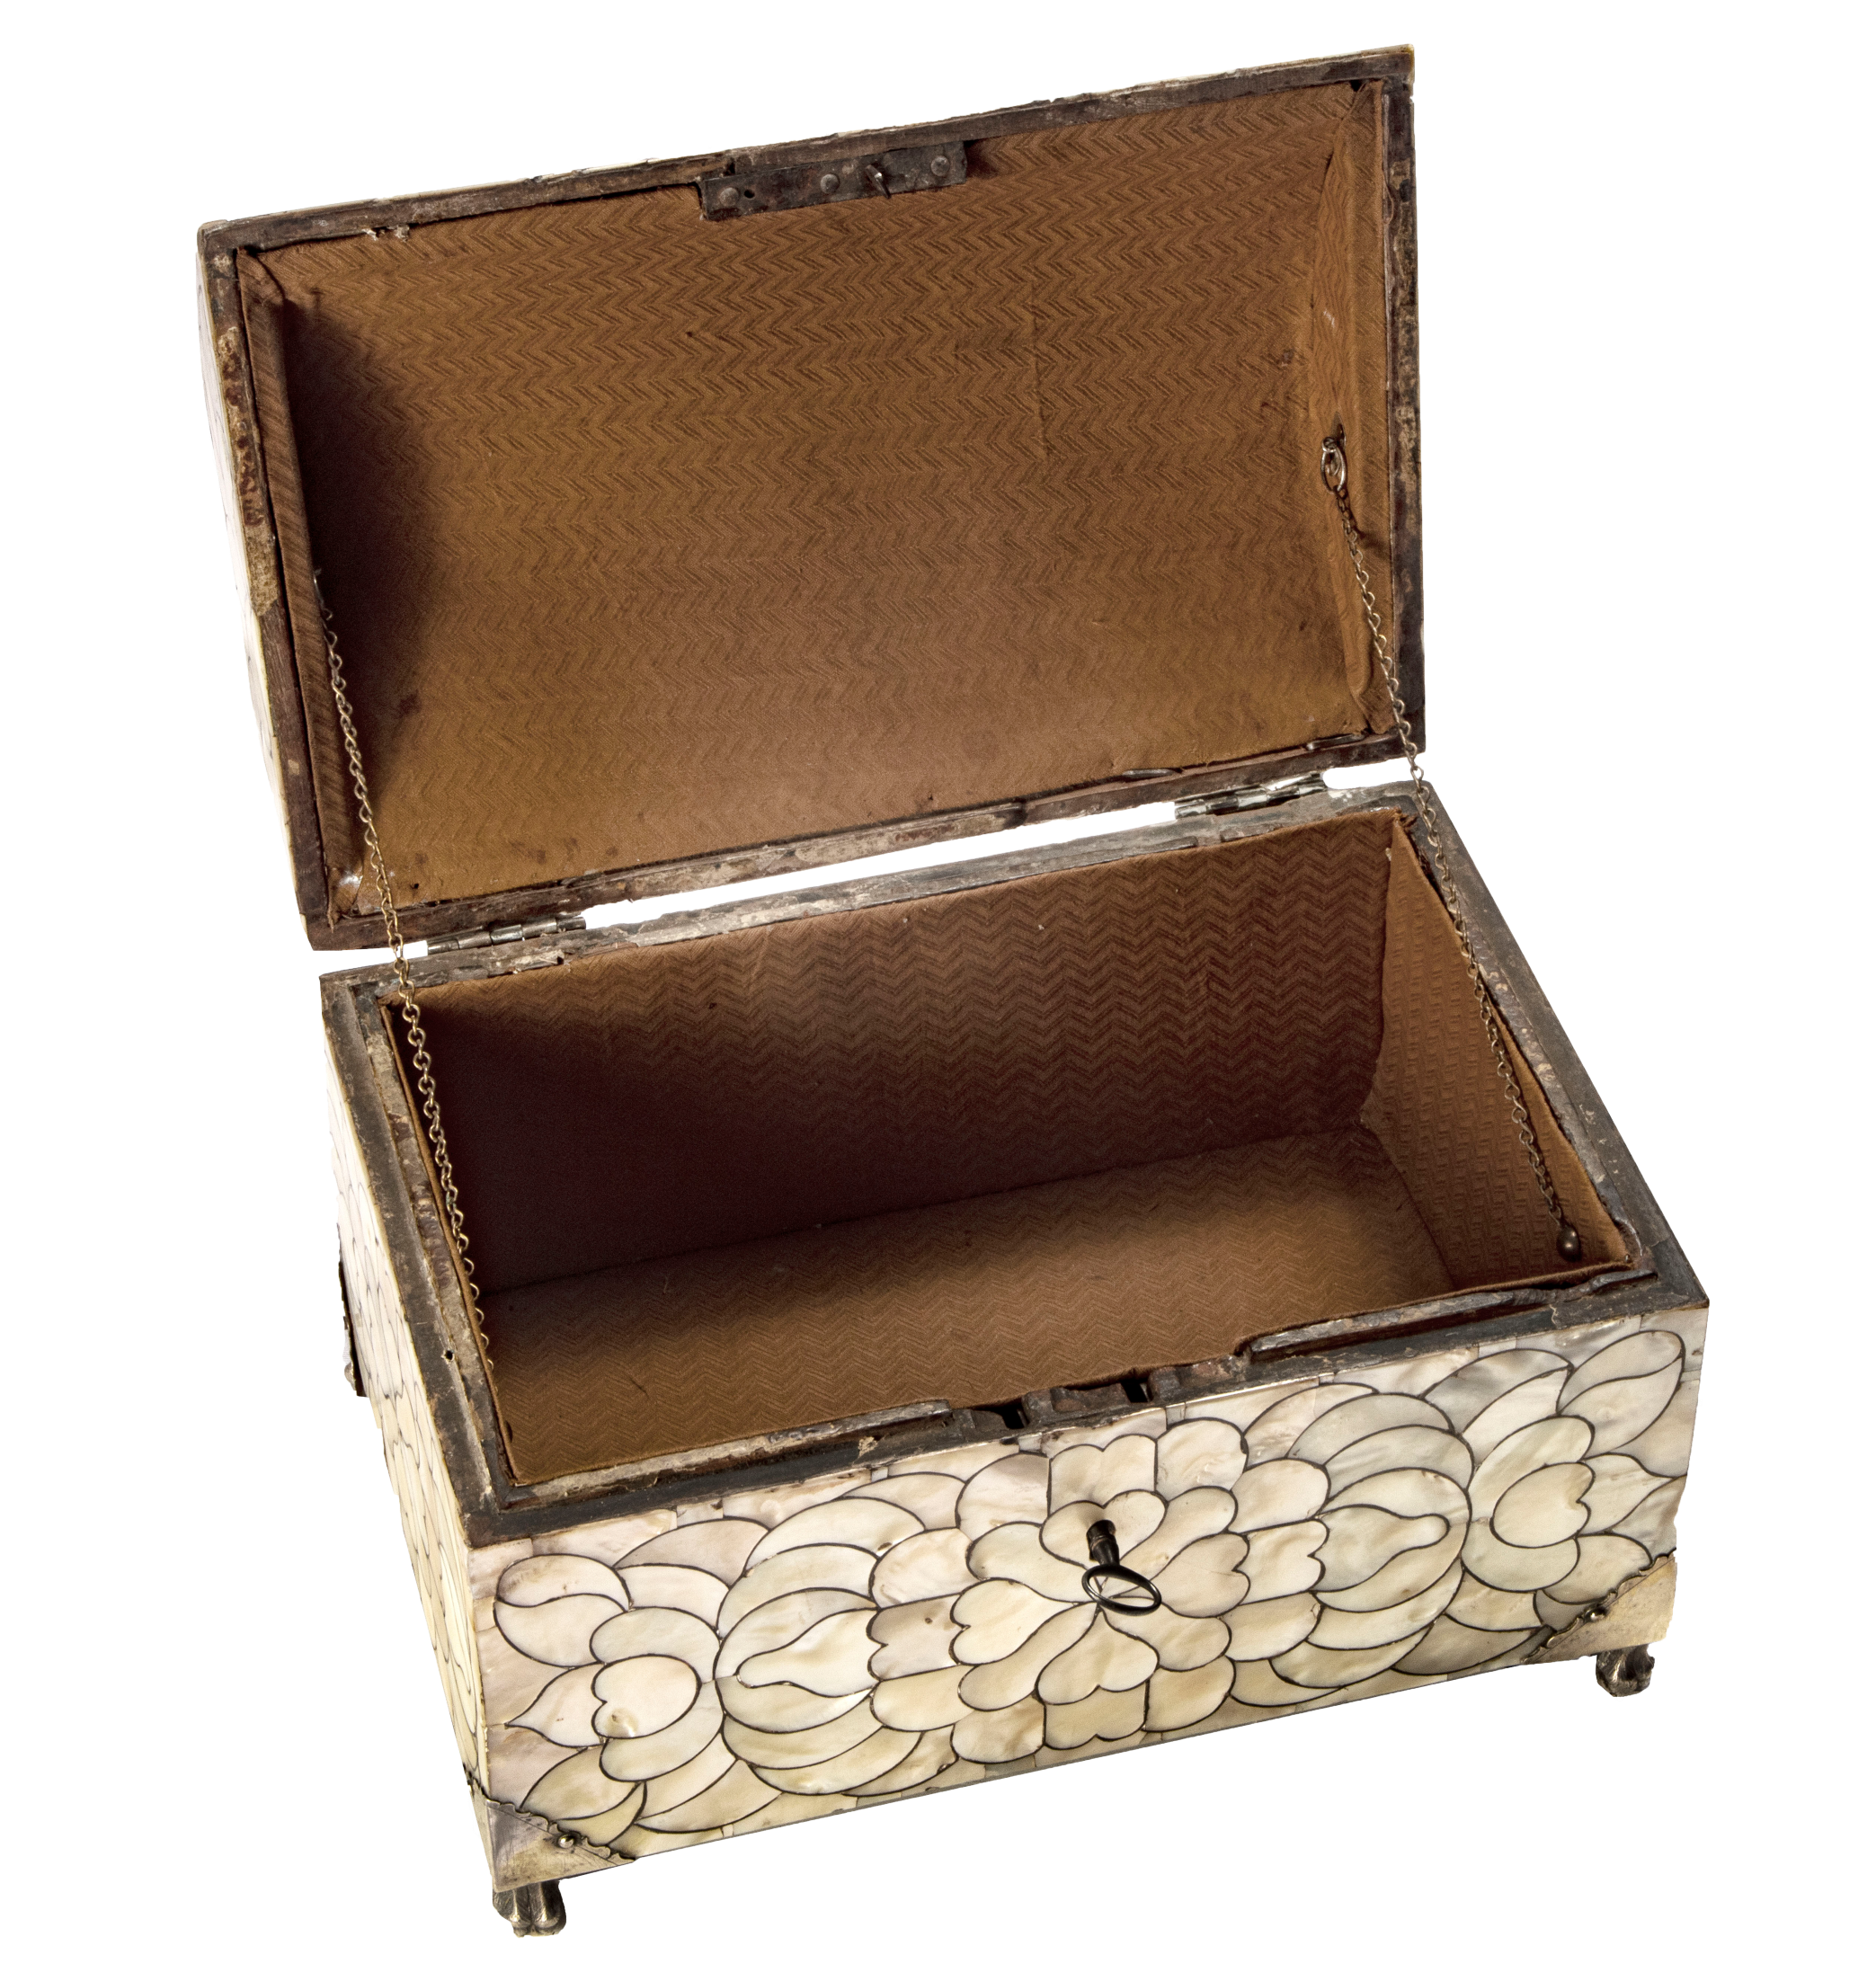 Pro_ Mother of Pearl Casket - open2 - Transparent Cropped.png